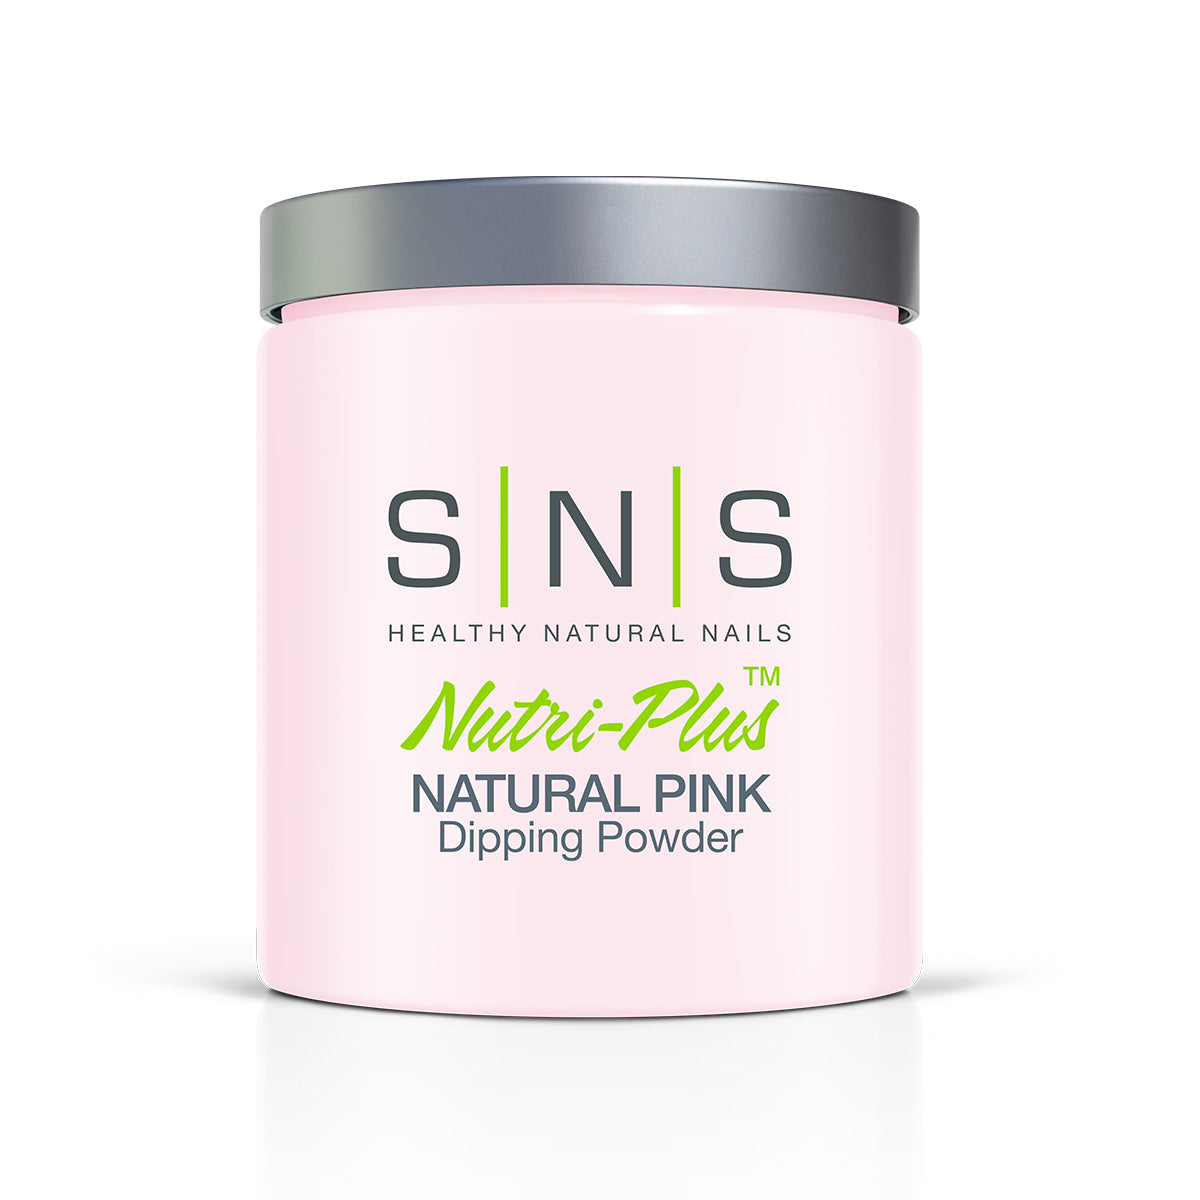 SNS Nutri-Plus French Dipping Powder Natural Pink 448g